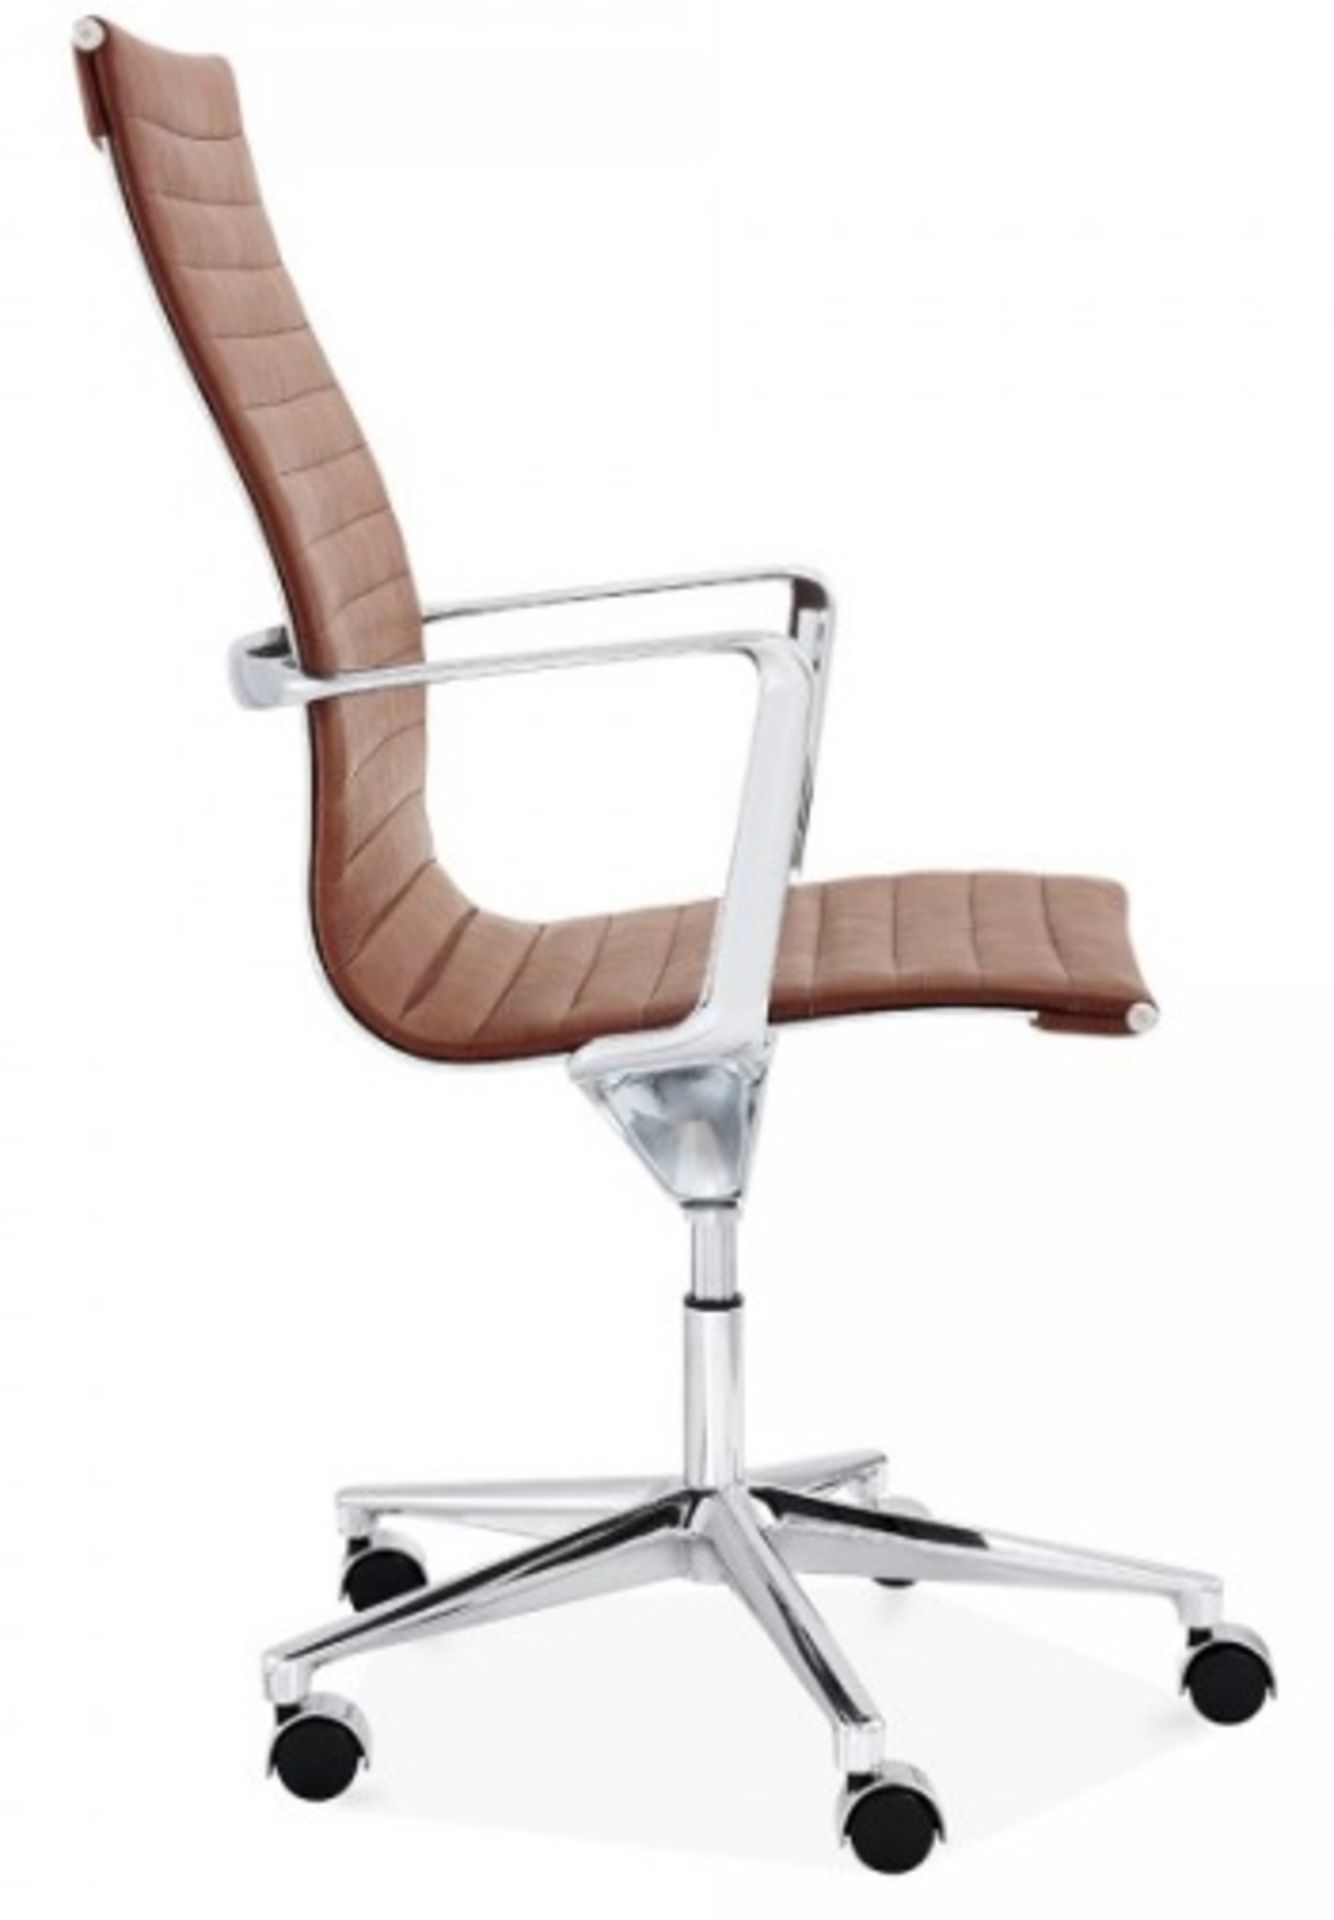 1 x LINEAR Eames-Inspired Ribbed High Back Office Swivel Chair In Brown Leather- New / Unboxed Stock - Image 5 of 5